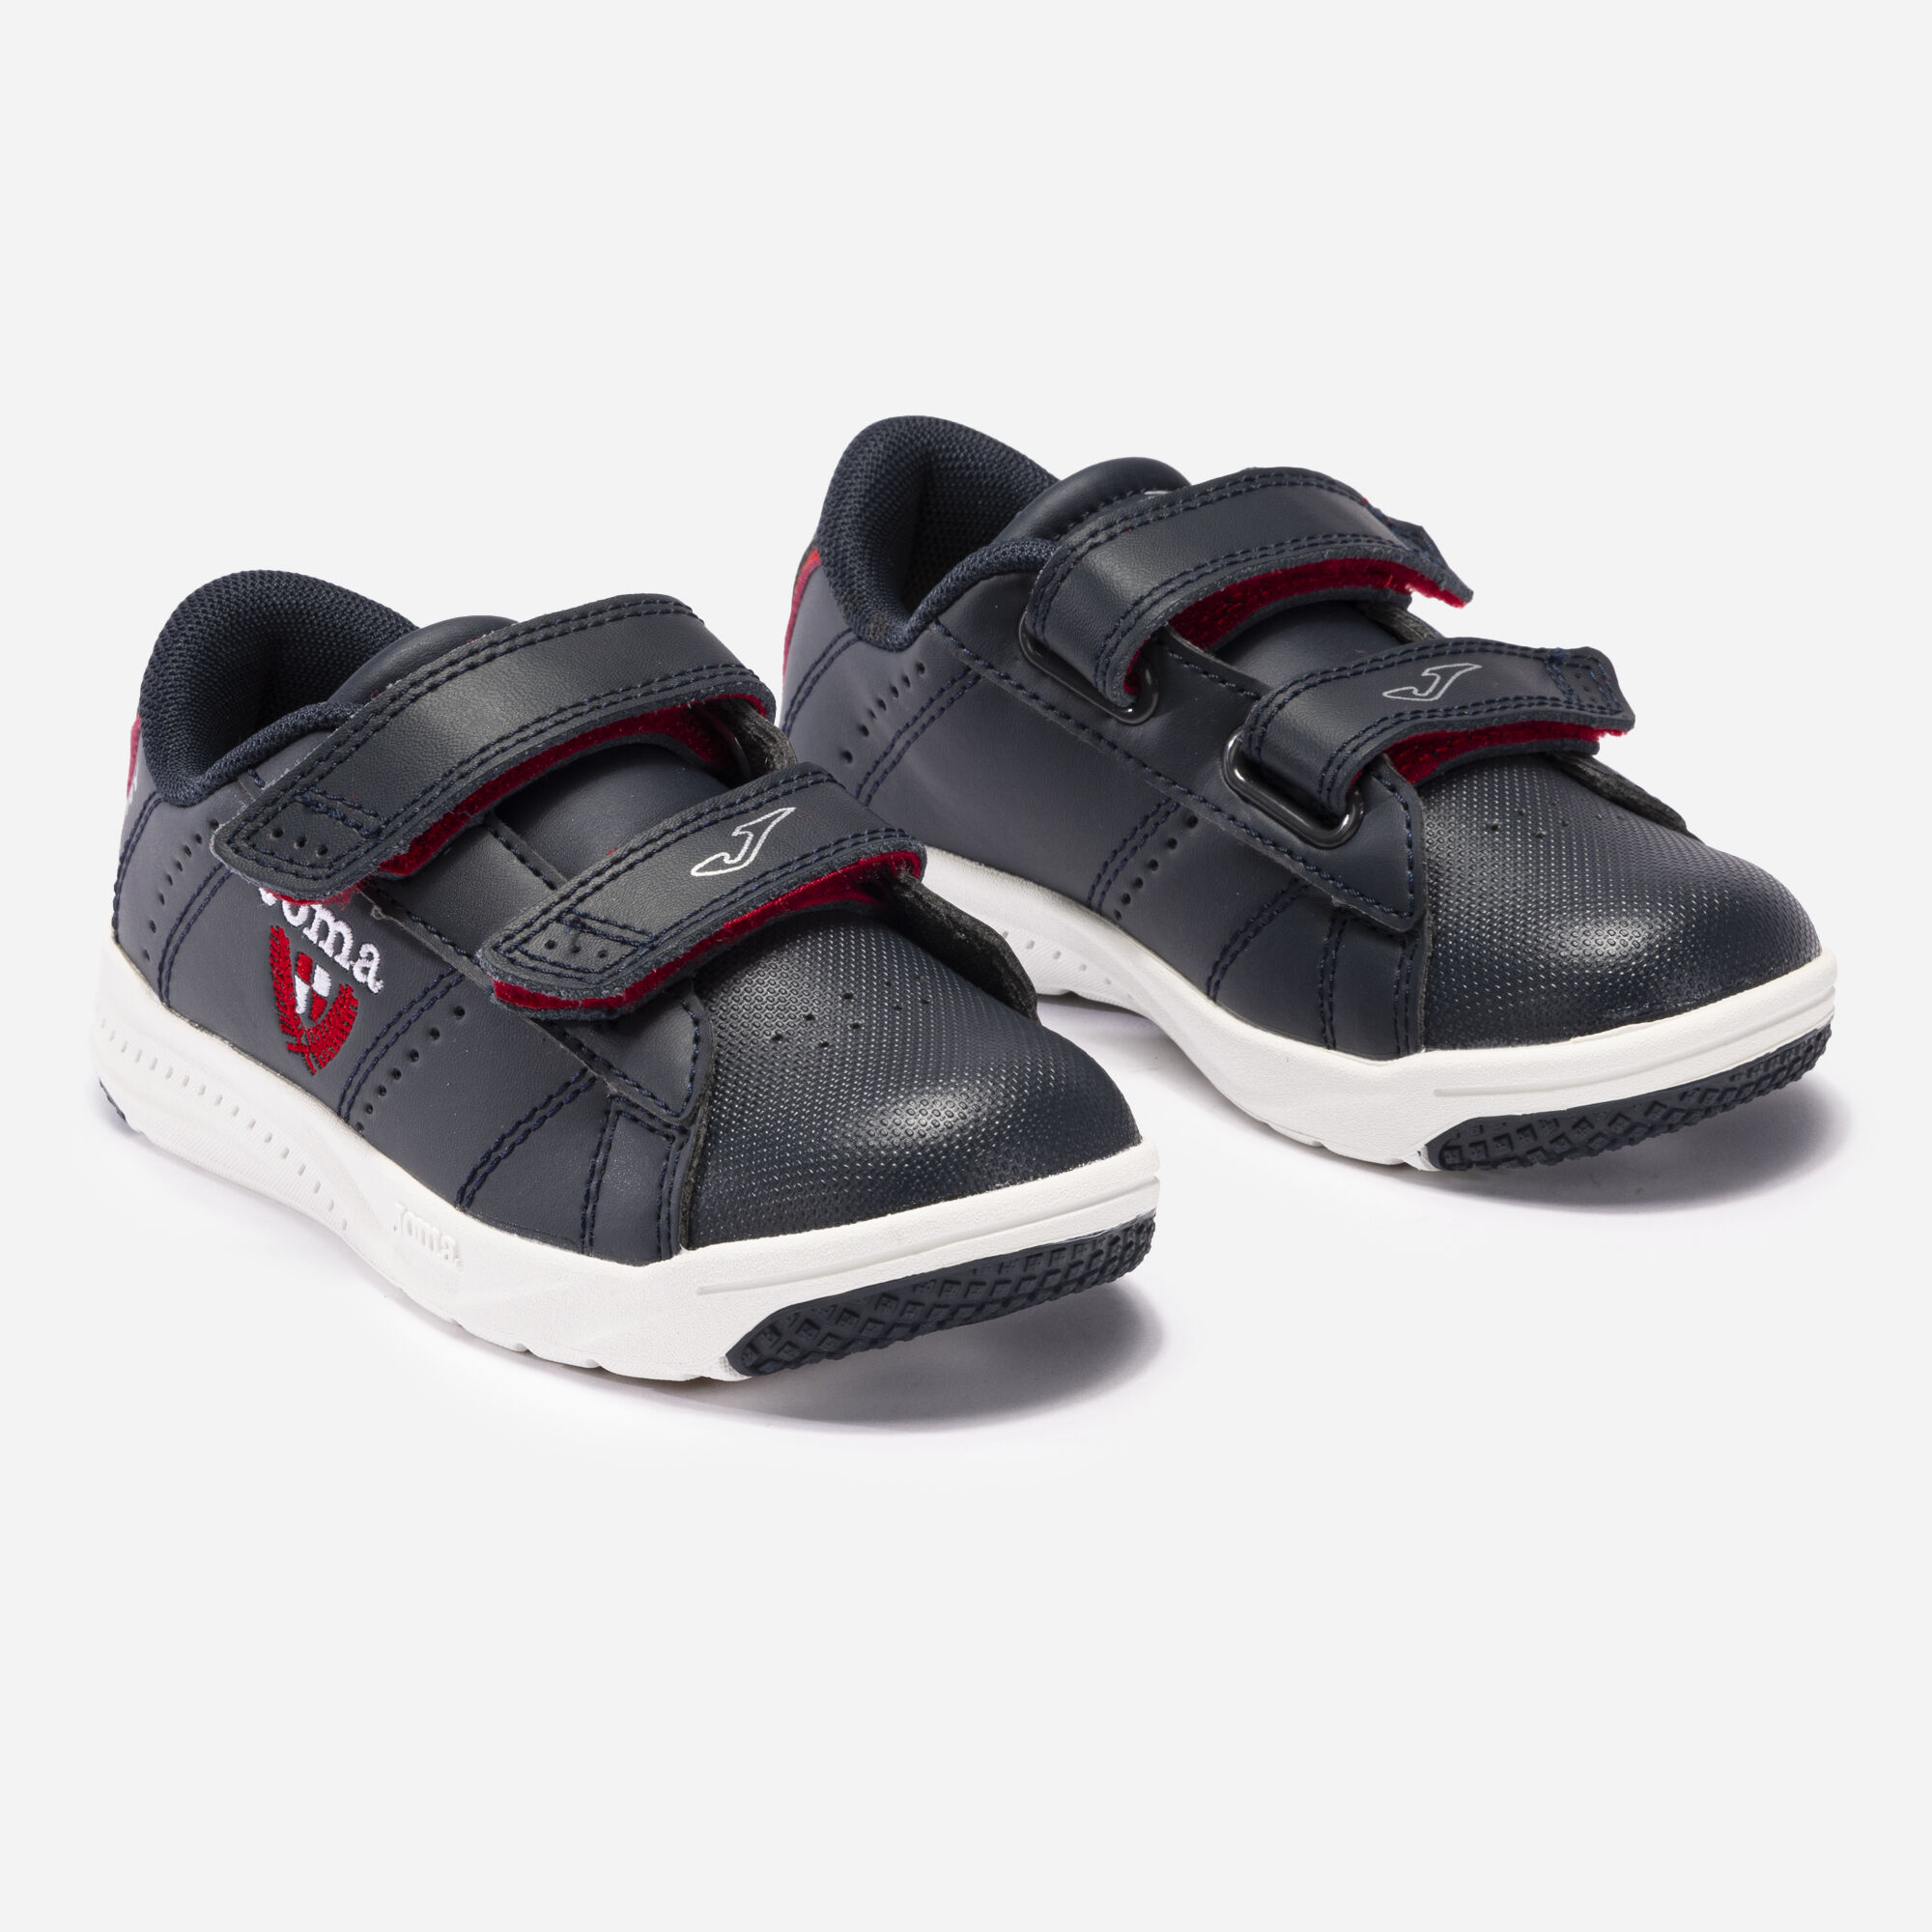 CHAUSSURES CASUAL PLAY 21 JUNIOR BLEU MARINE ROUGE